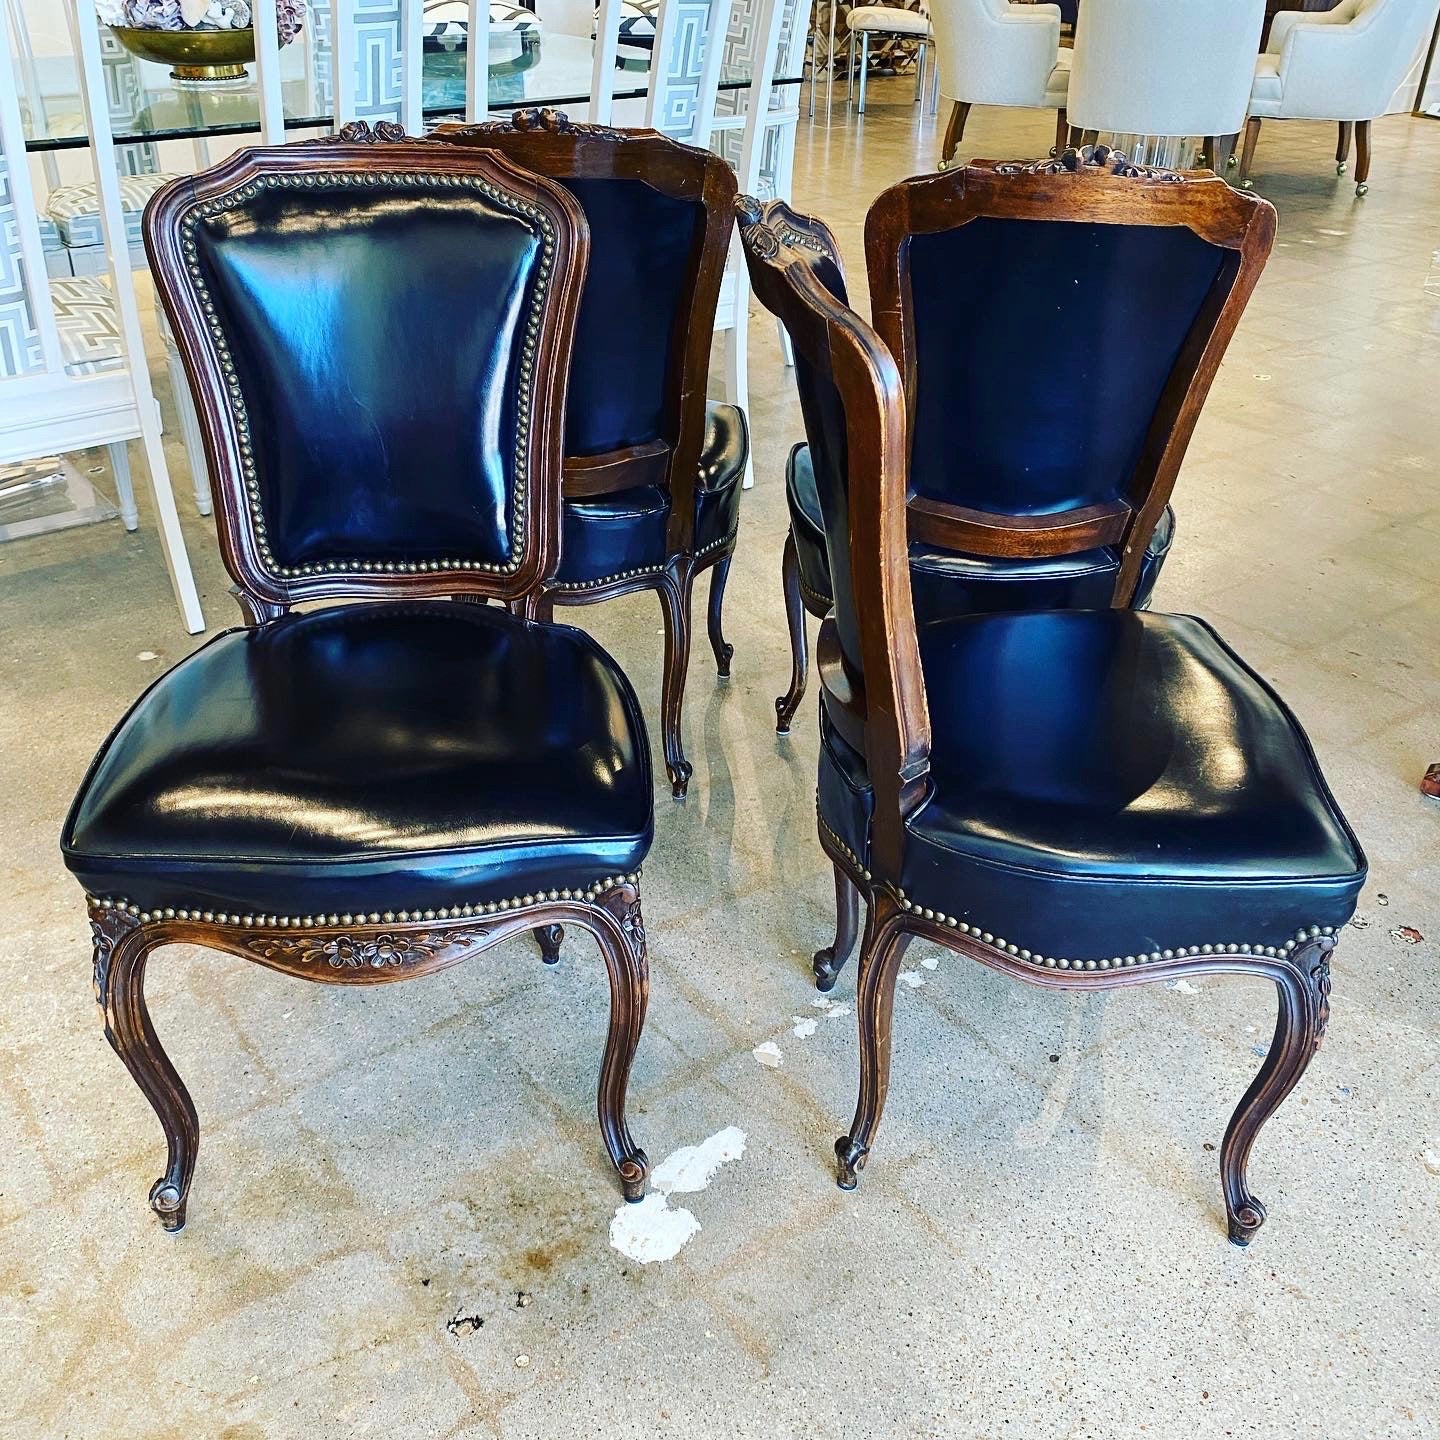 louis chairs dining black